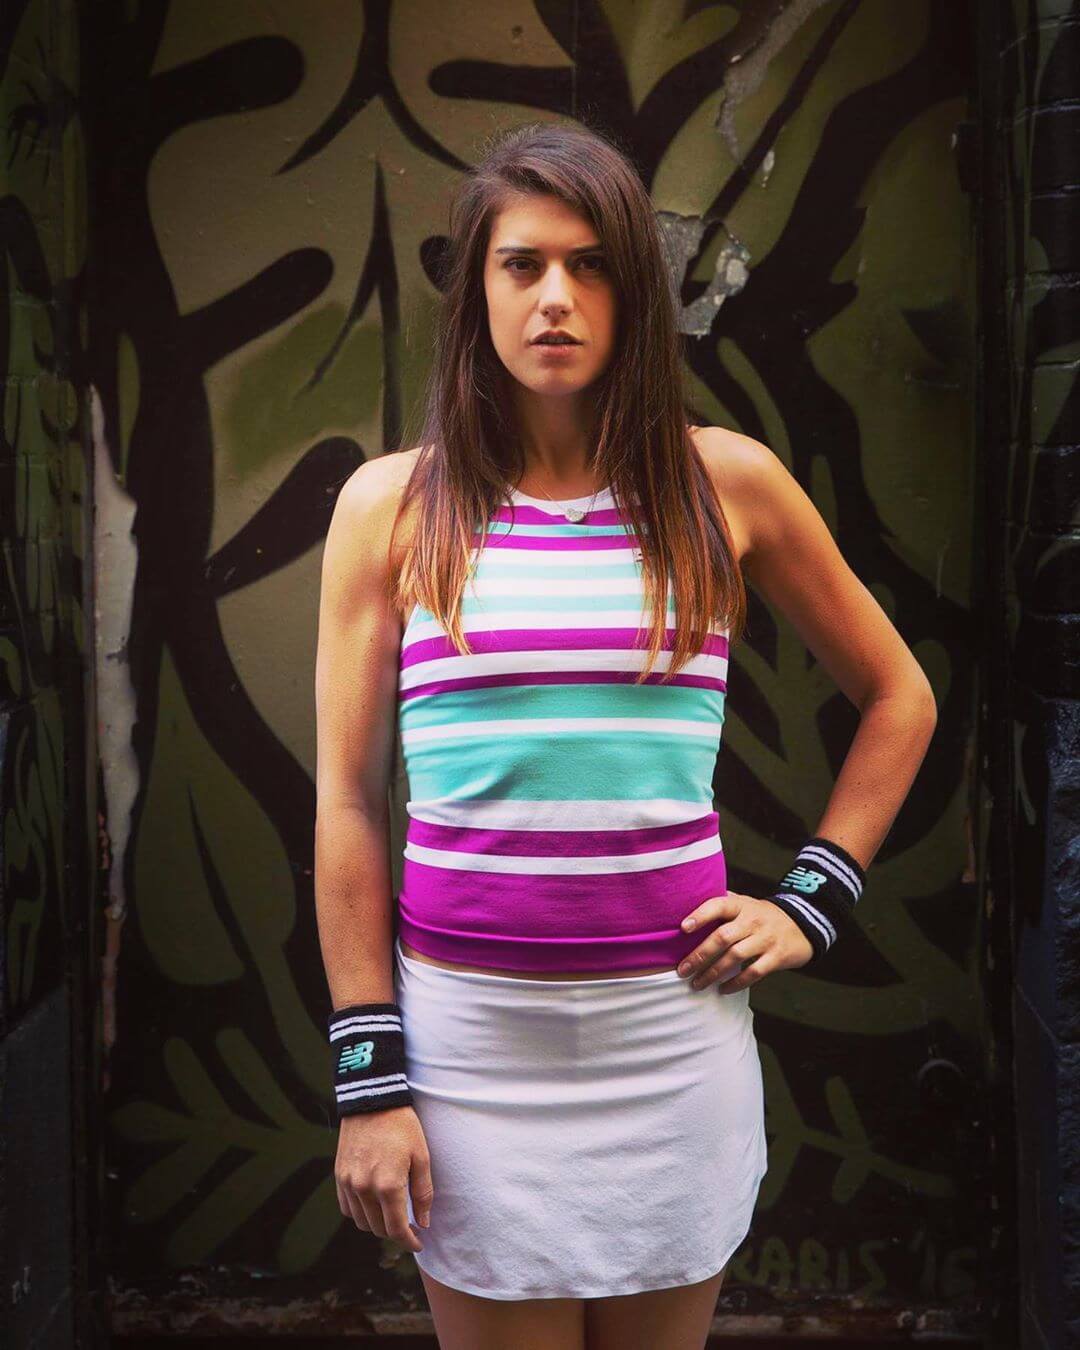 49 Hot Pictures Of Sorana Cirstea Will Make You Lose Your Mind | Best Of Comic Books